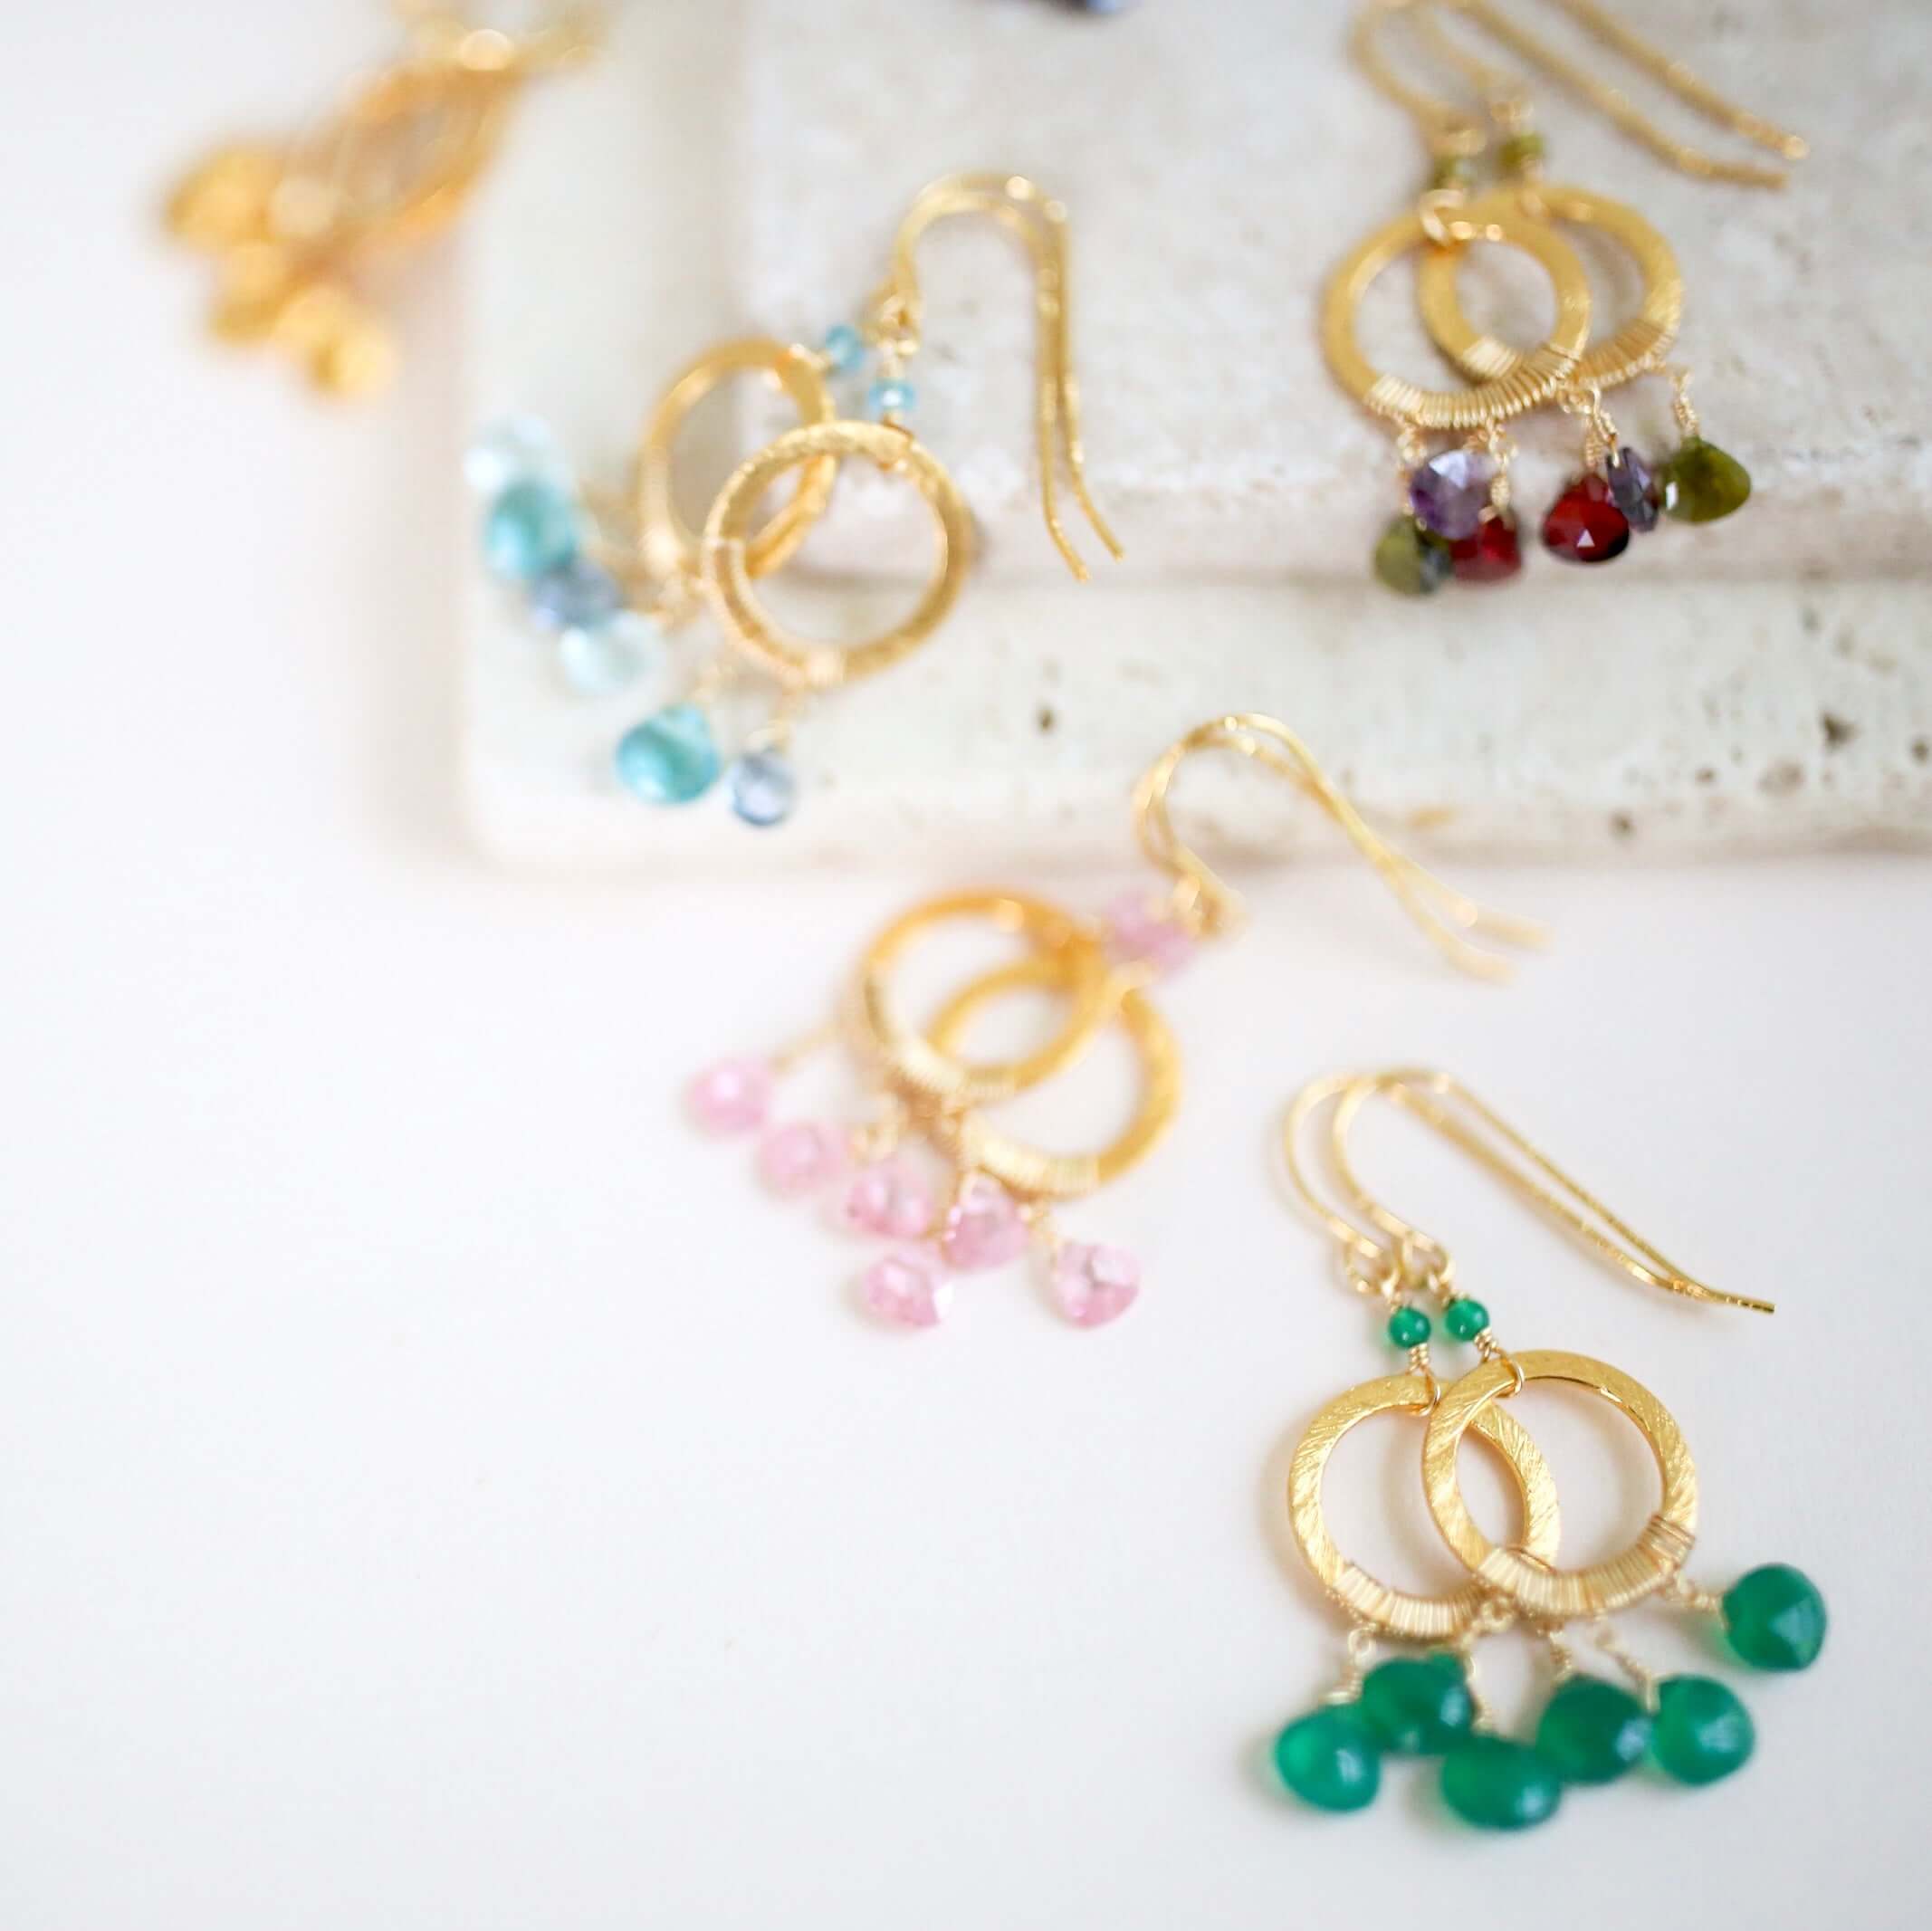 Colorful Boho Mini Earrings with Sparkling Gemstones